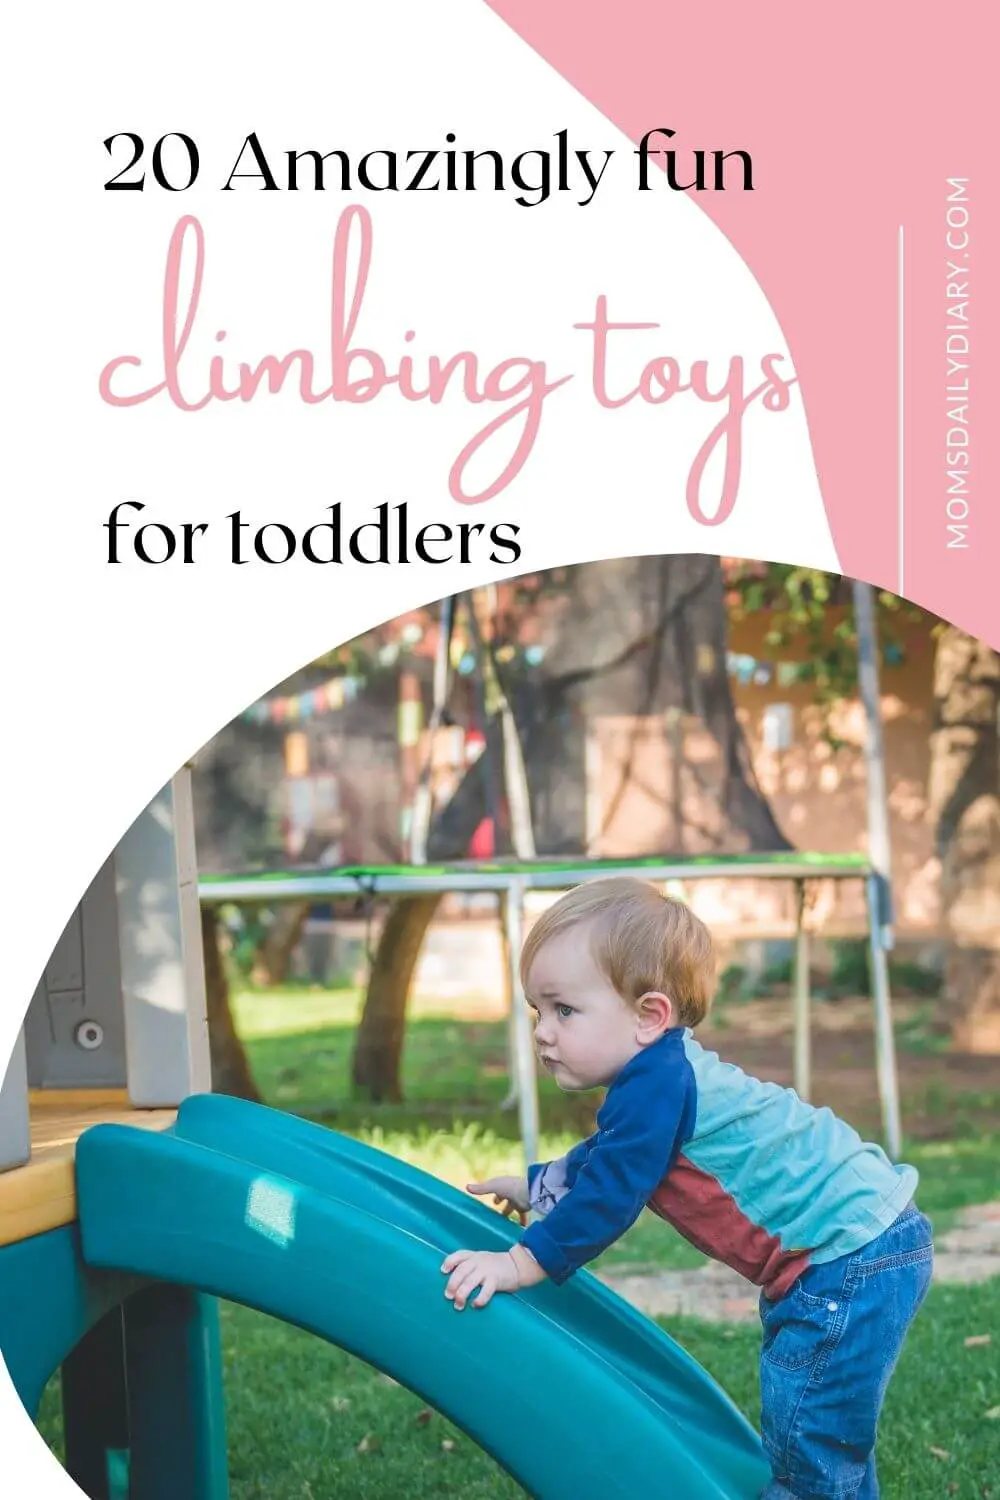 Pinterest pin with an image of a toddler on a climbing toy and text "20 Amazingly fun climbing toys for toddlers".